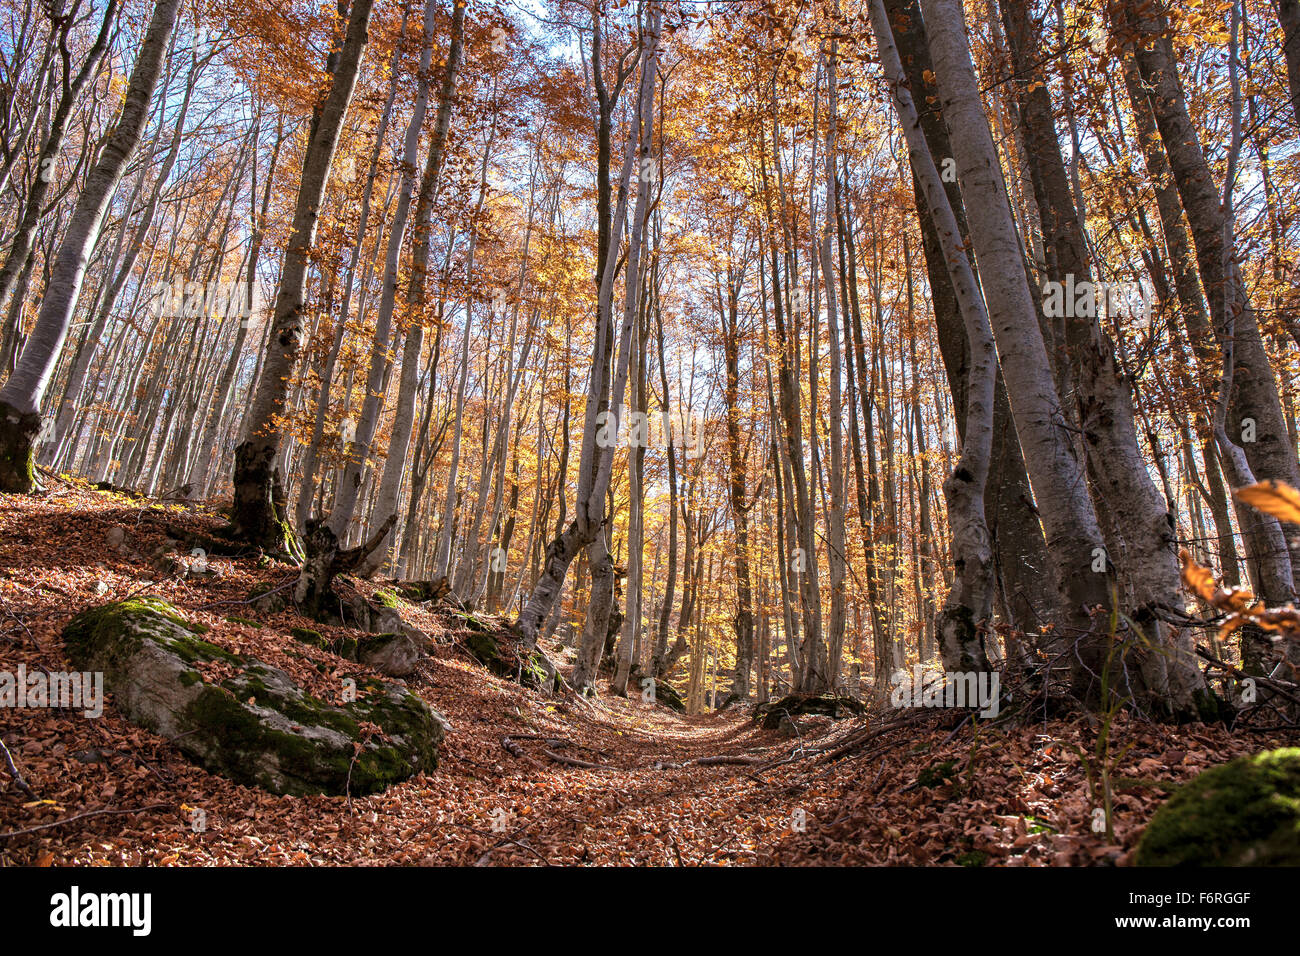 Landscape with an autumn in a beech trees forest. The leaves are falling from time to time. Stock Photo